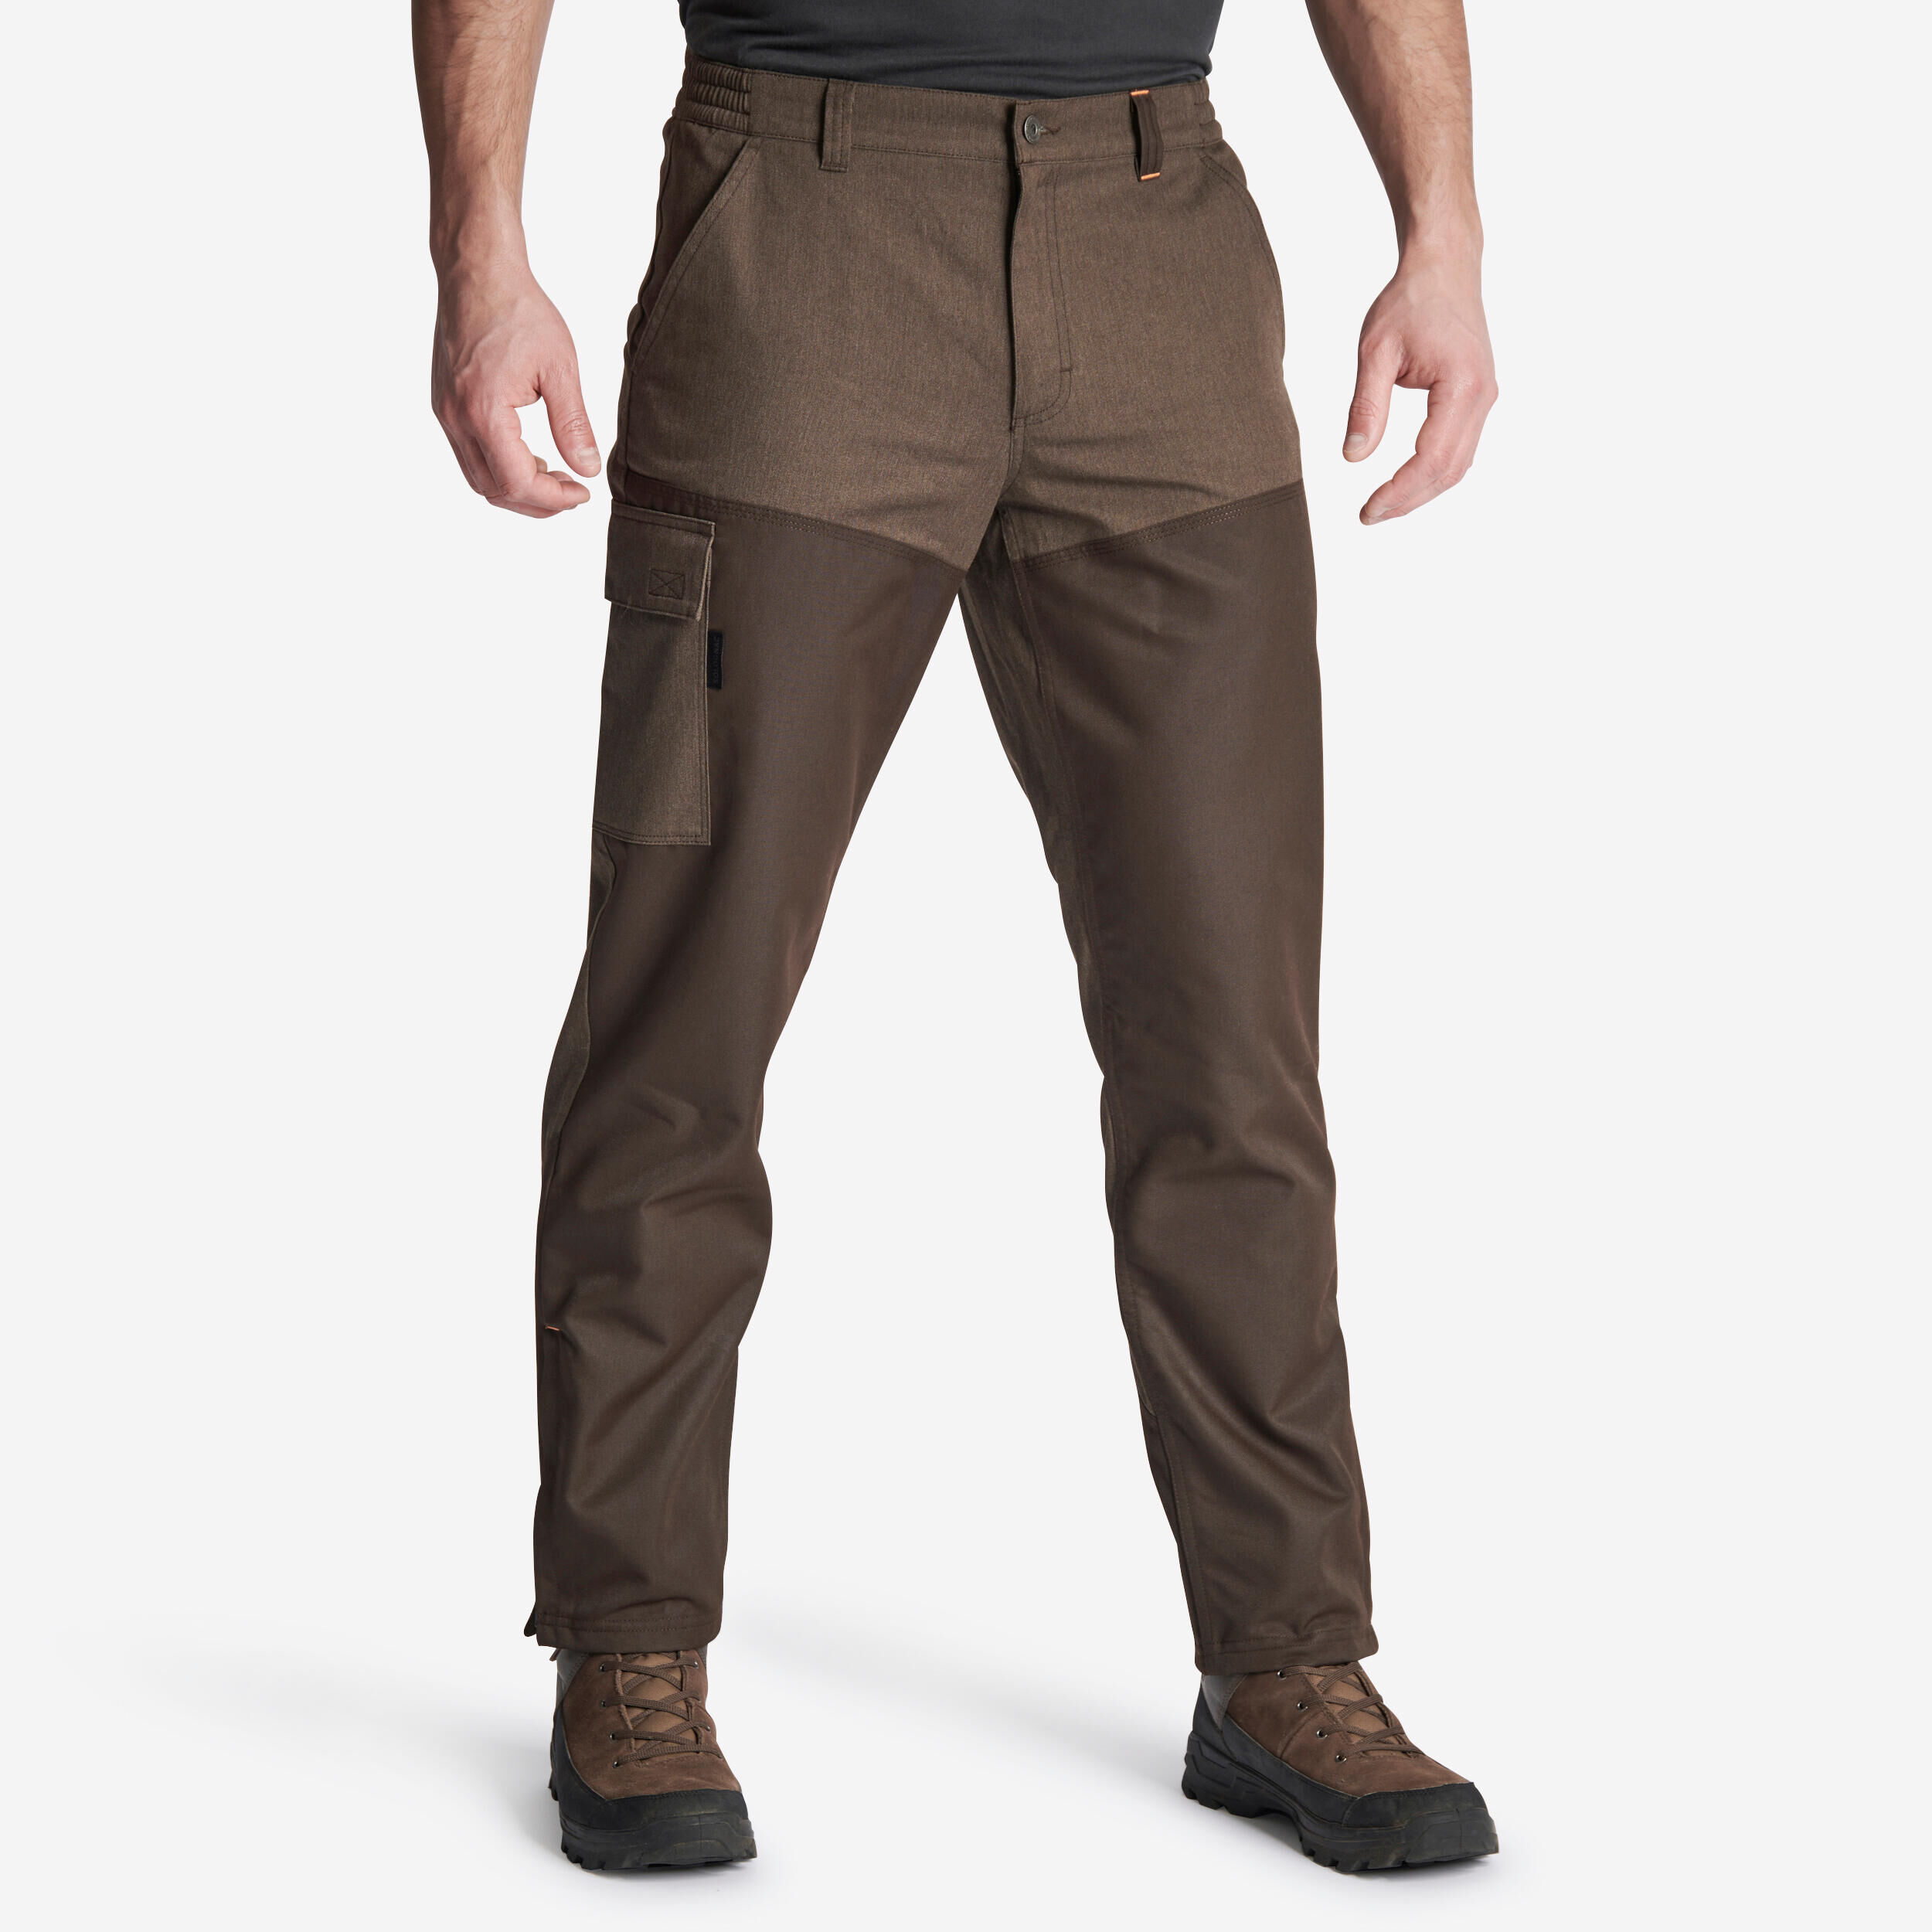 SOLOGNAC TAPERED HUNTING TROUSERS RENFORT 100 - BROWN